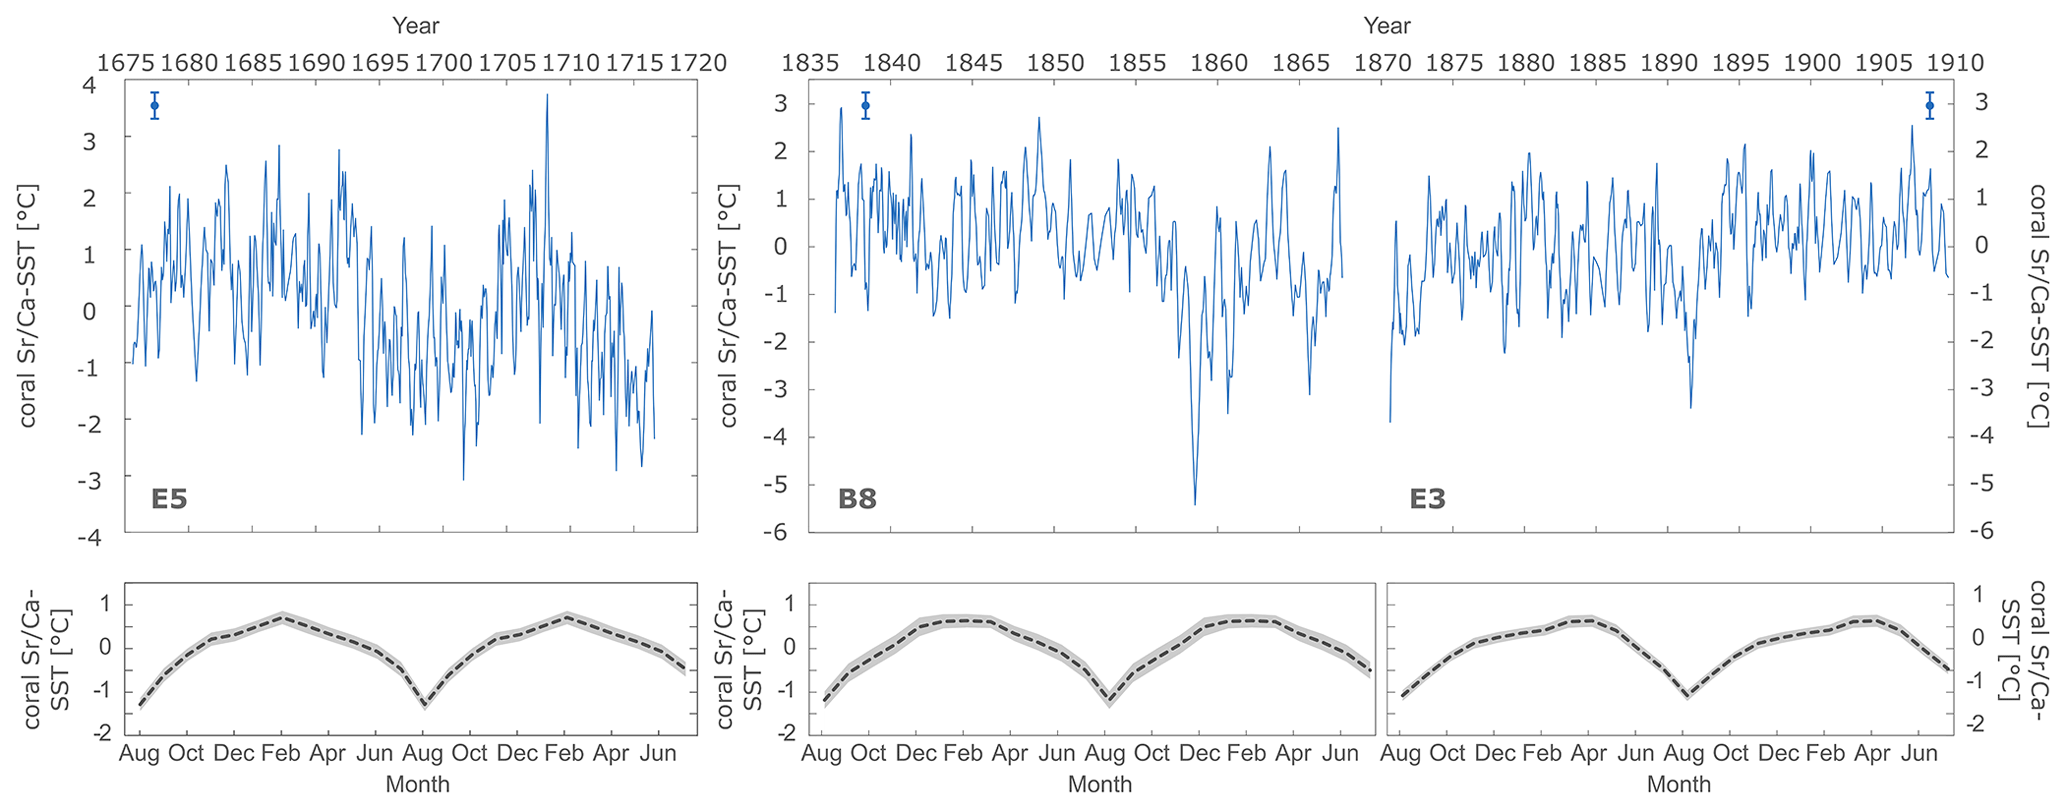 Cp El Nino Southern Oscillation And Internal Sea Surface Temperature Variability In The Tropical Indian Ocean Since 1675